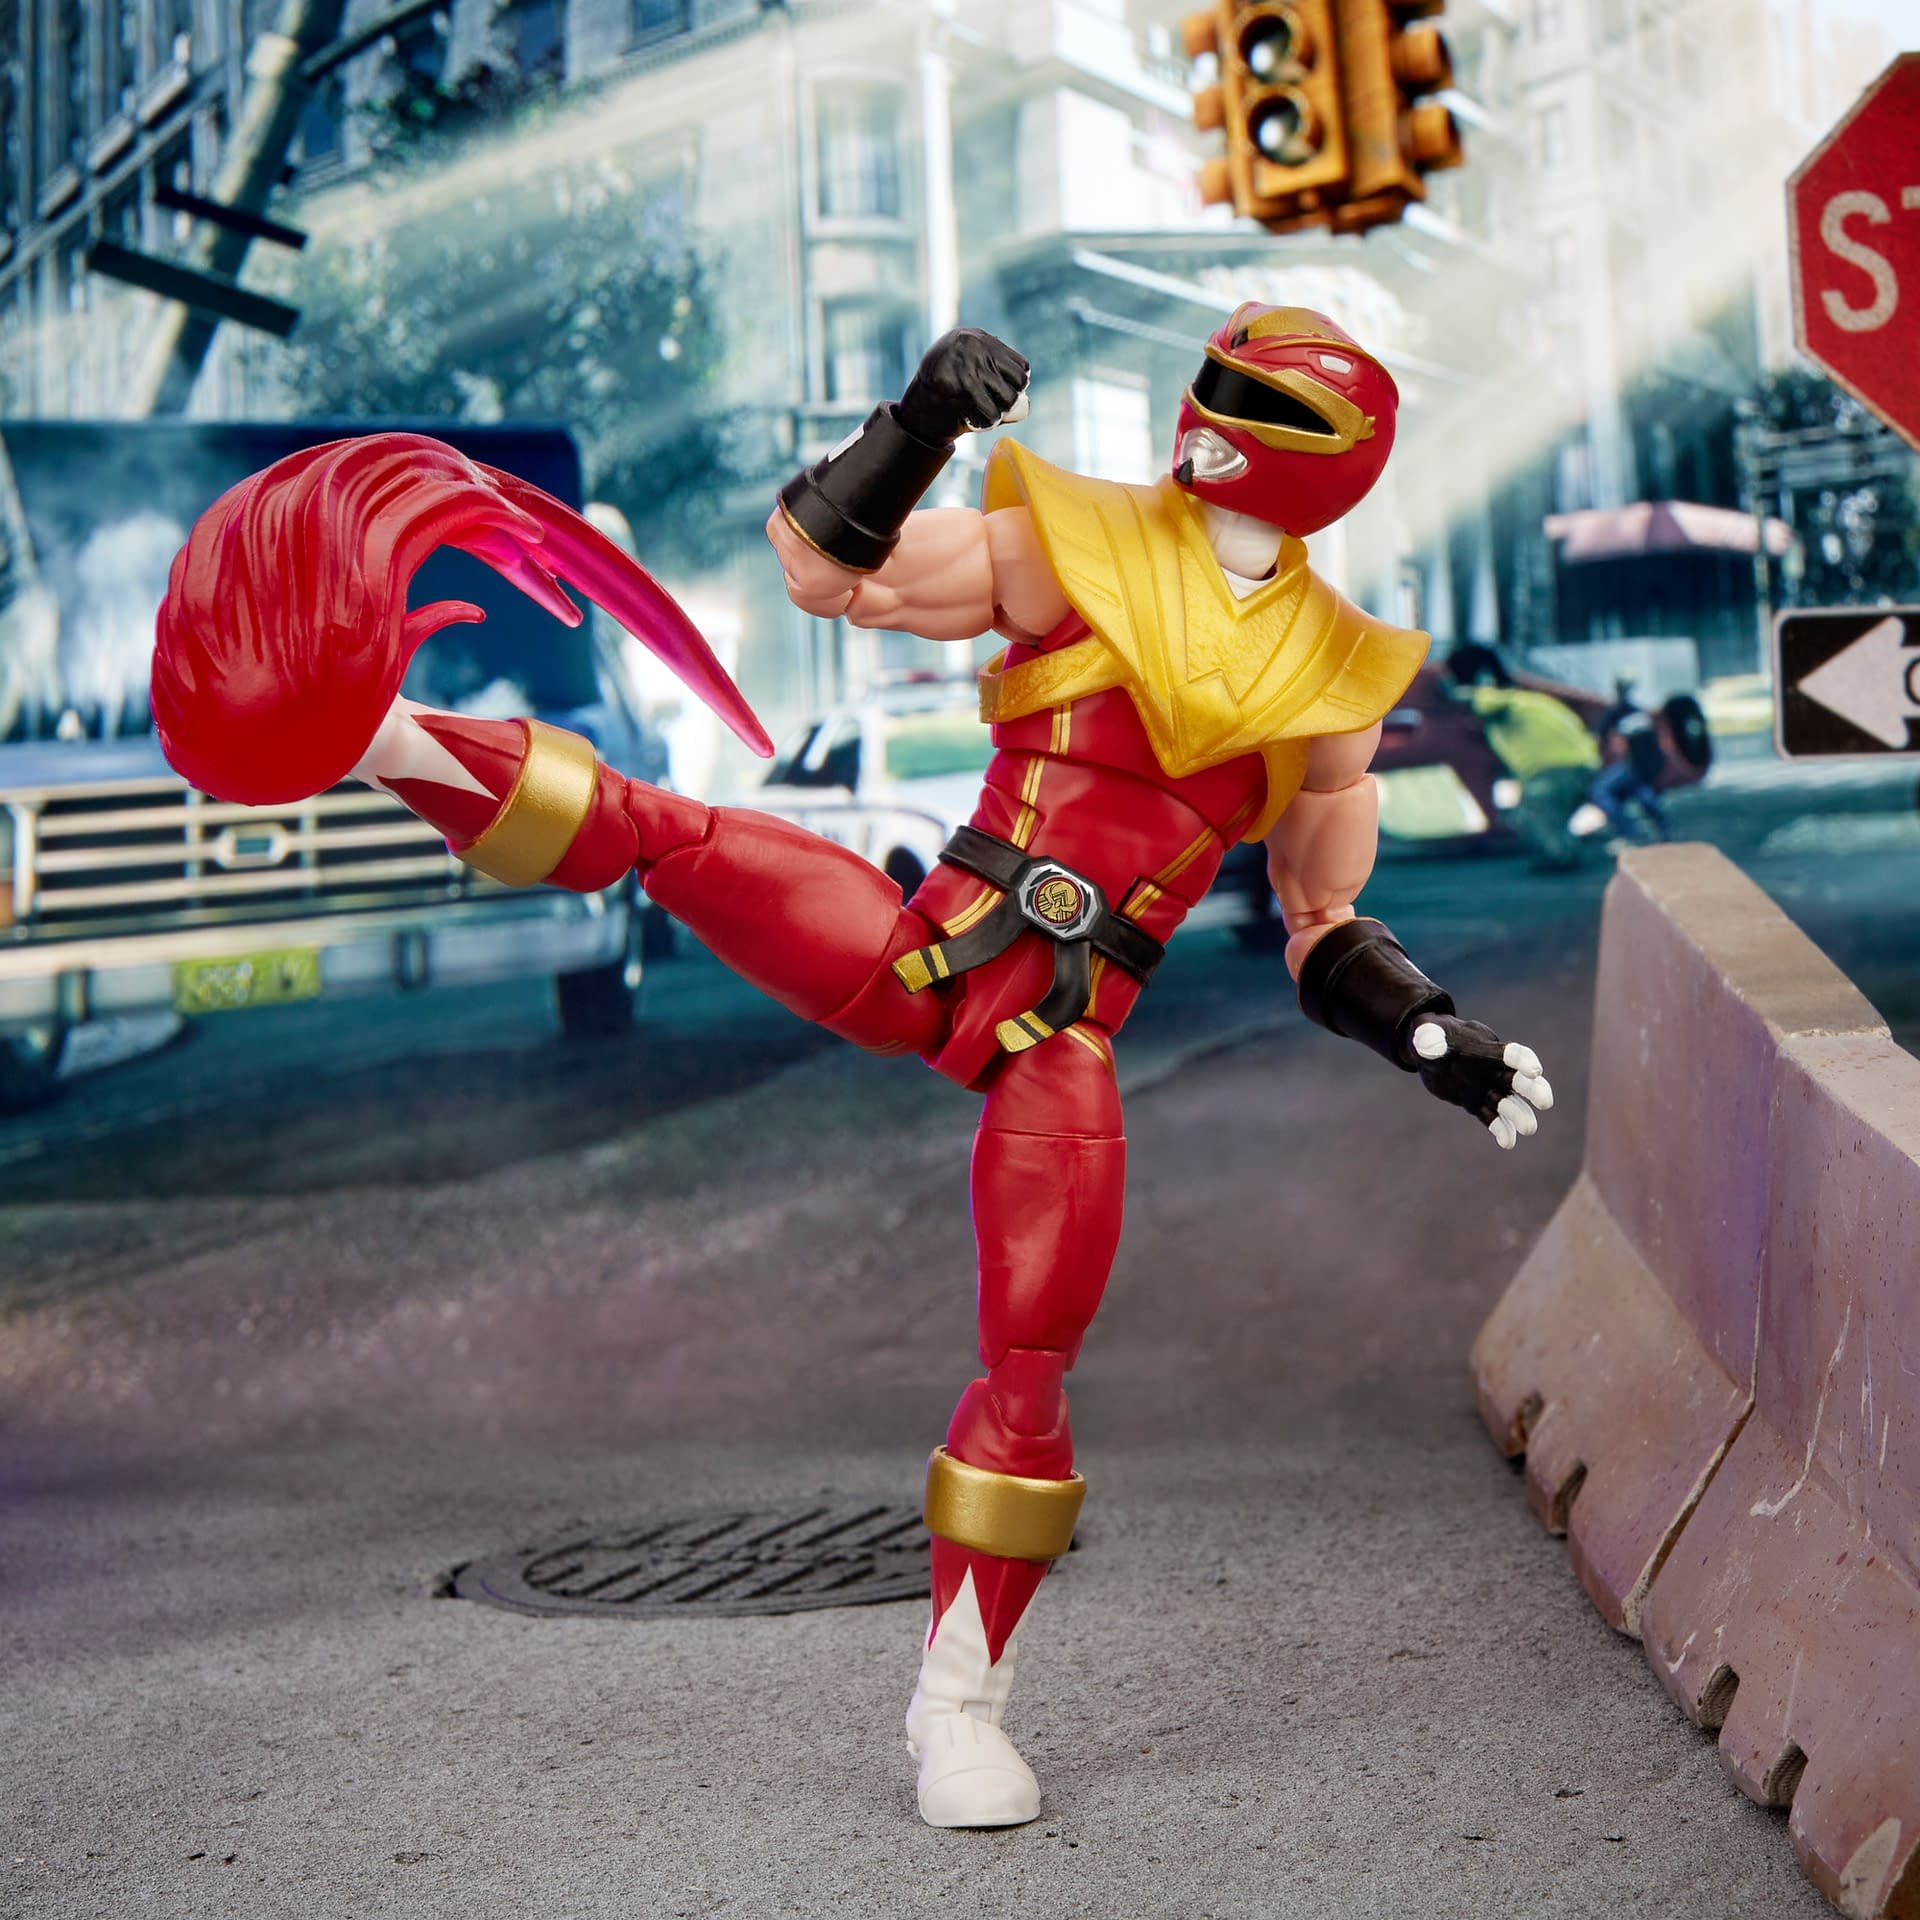 It's Morphin Time For Street Fighter Ken with New Power Rangers Figure 